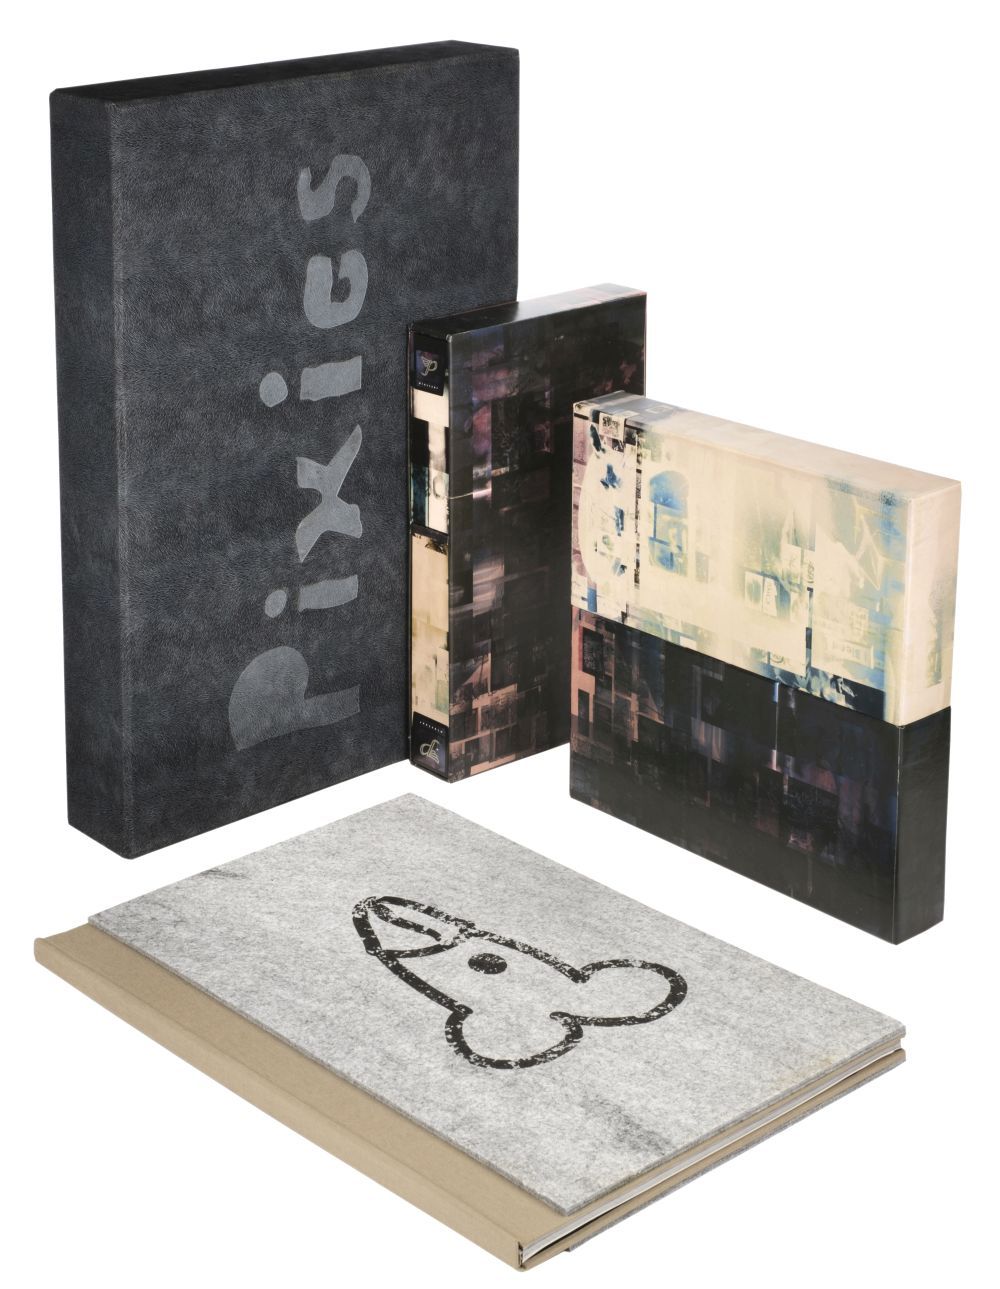 Pixies. Minotaur, limited deluxe edition, Artist in Residence (record label), 2009